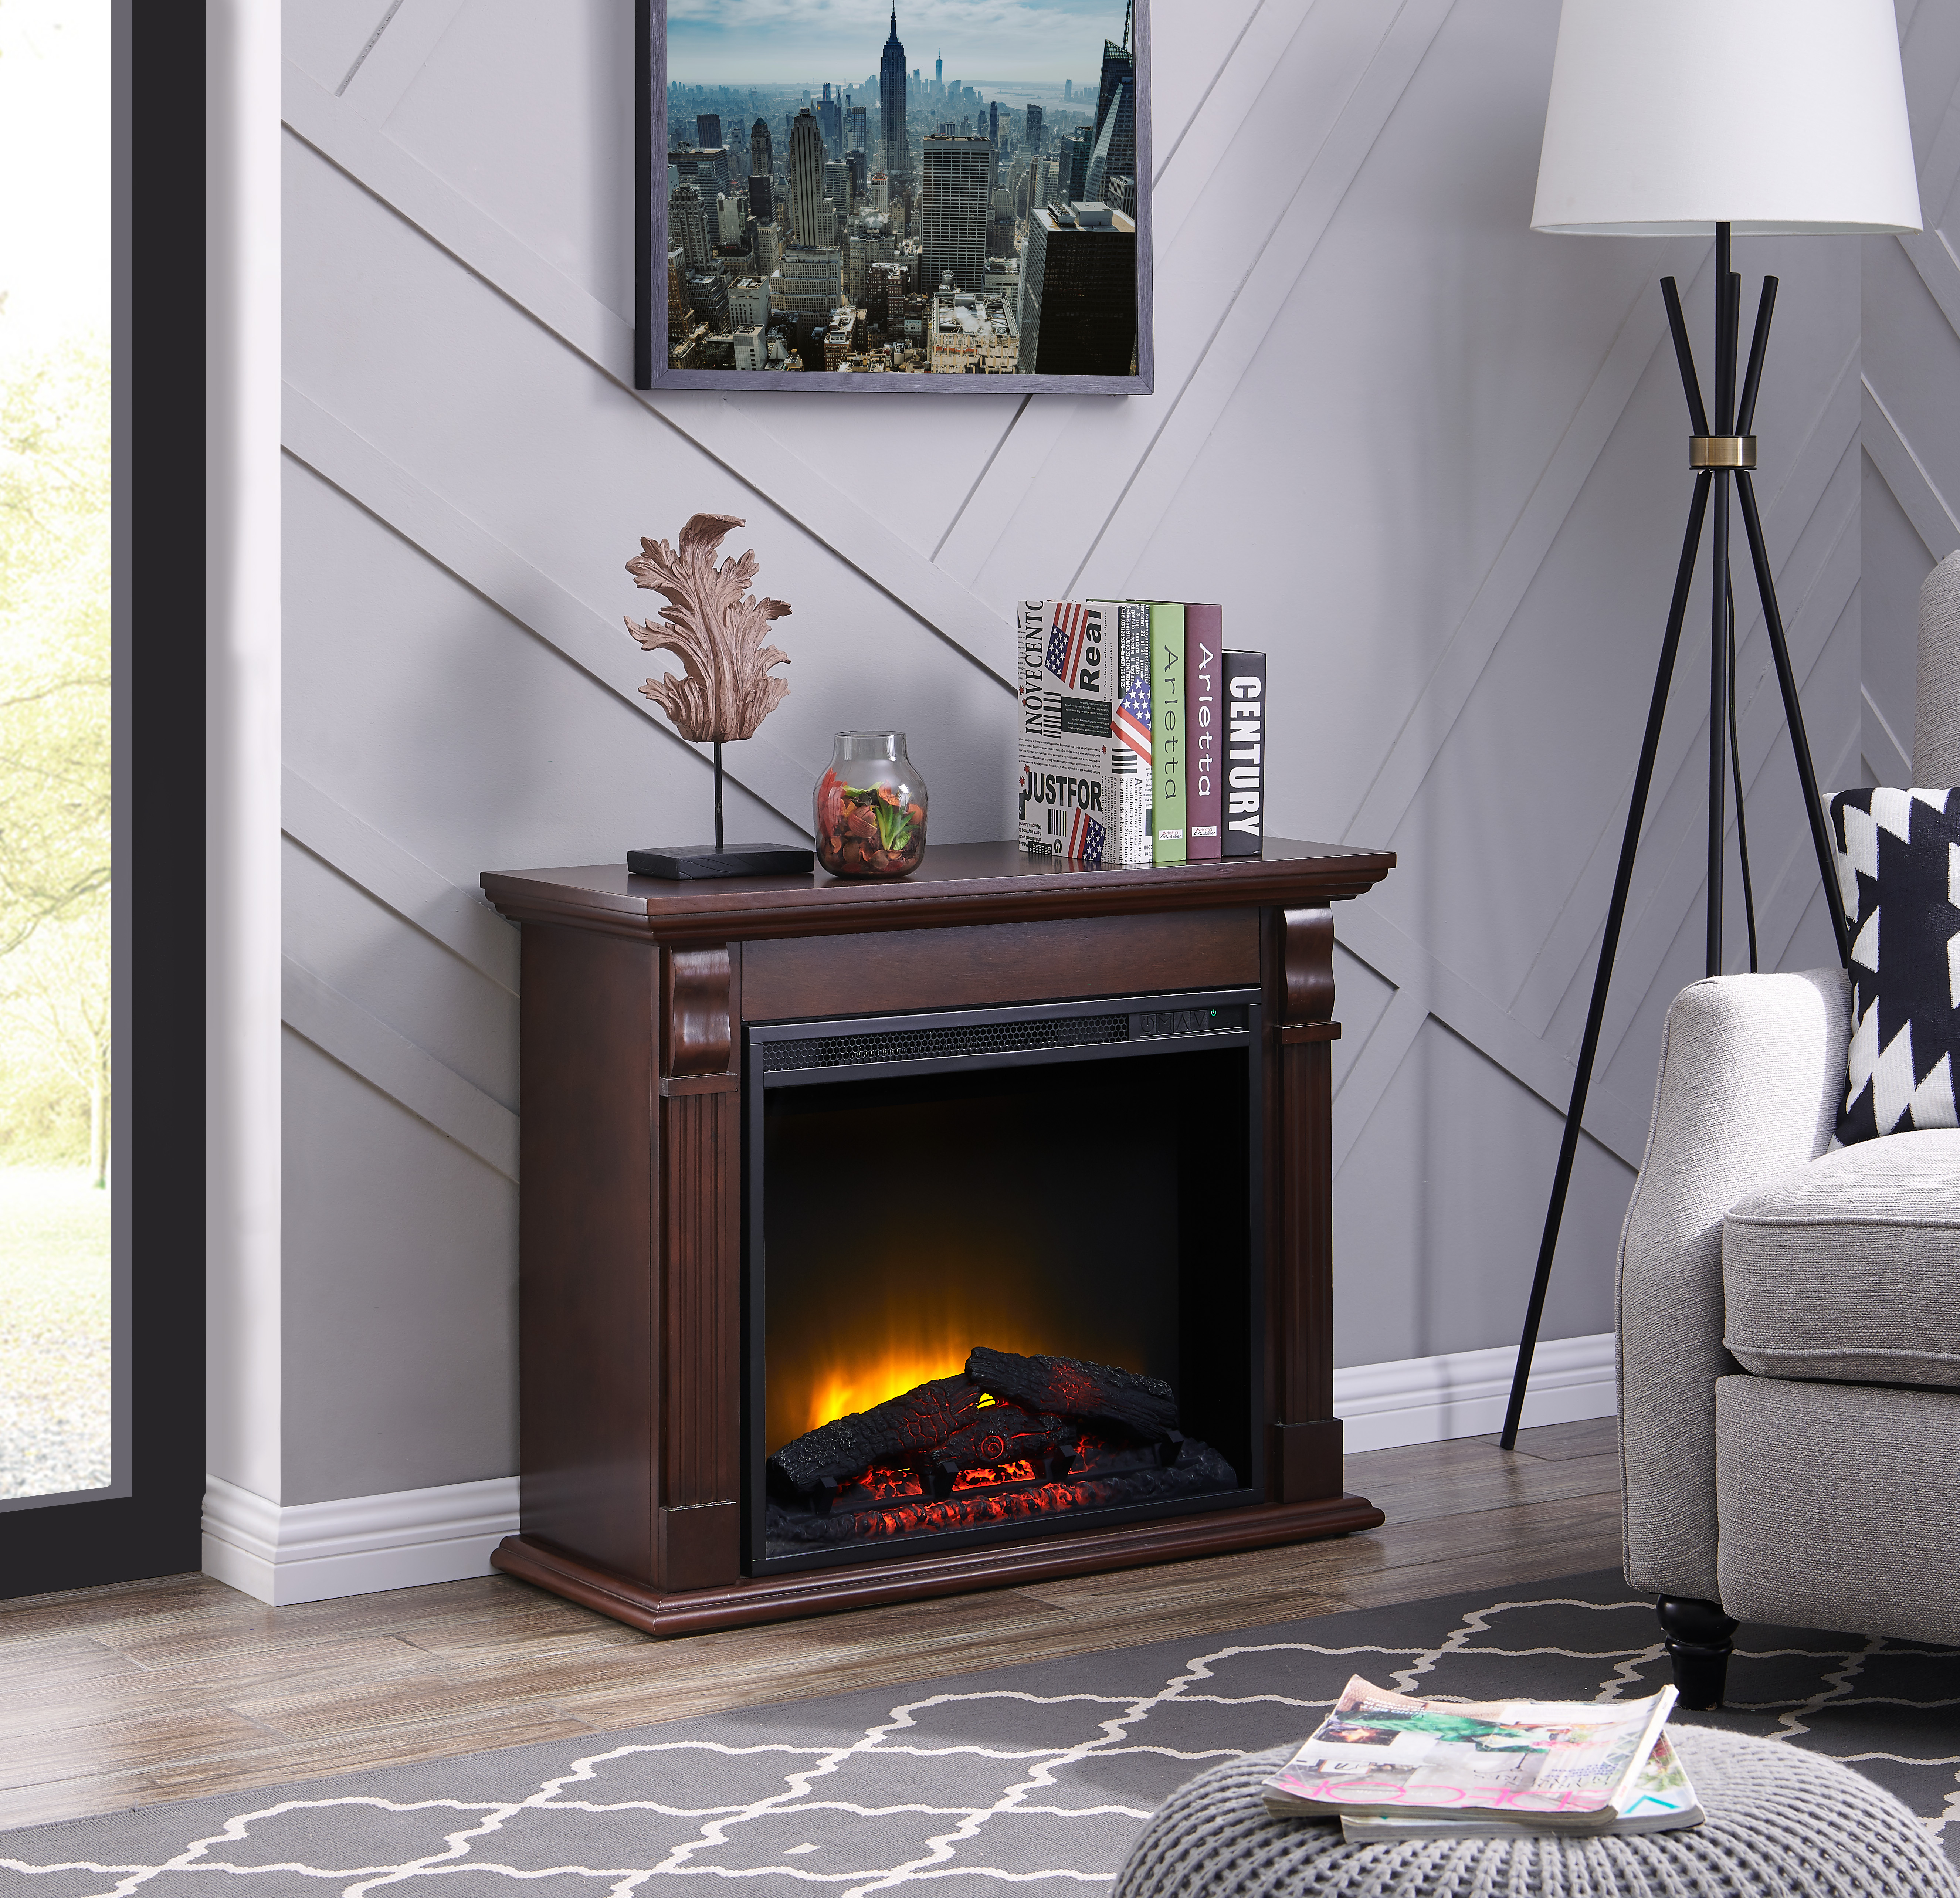 Value City Tv Stand with Fireplace Fresh Bold Flame 33 46 Inch Electric Fireplace In Chestnut